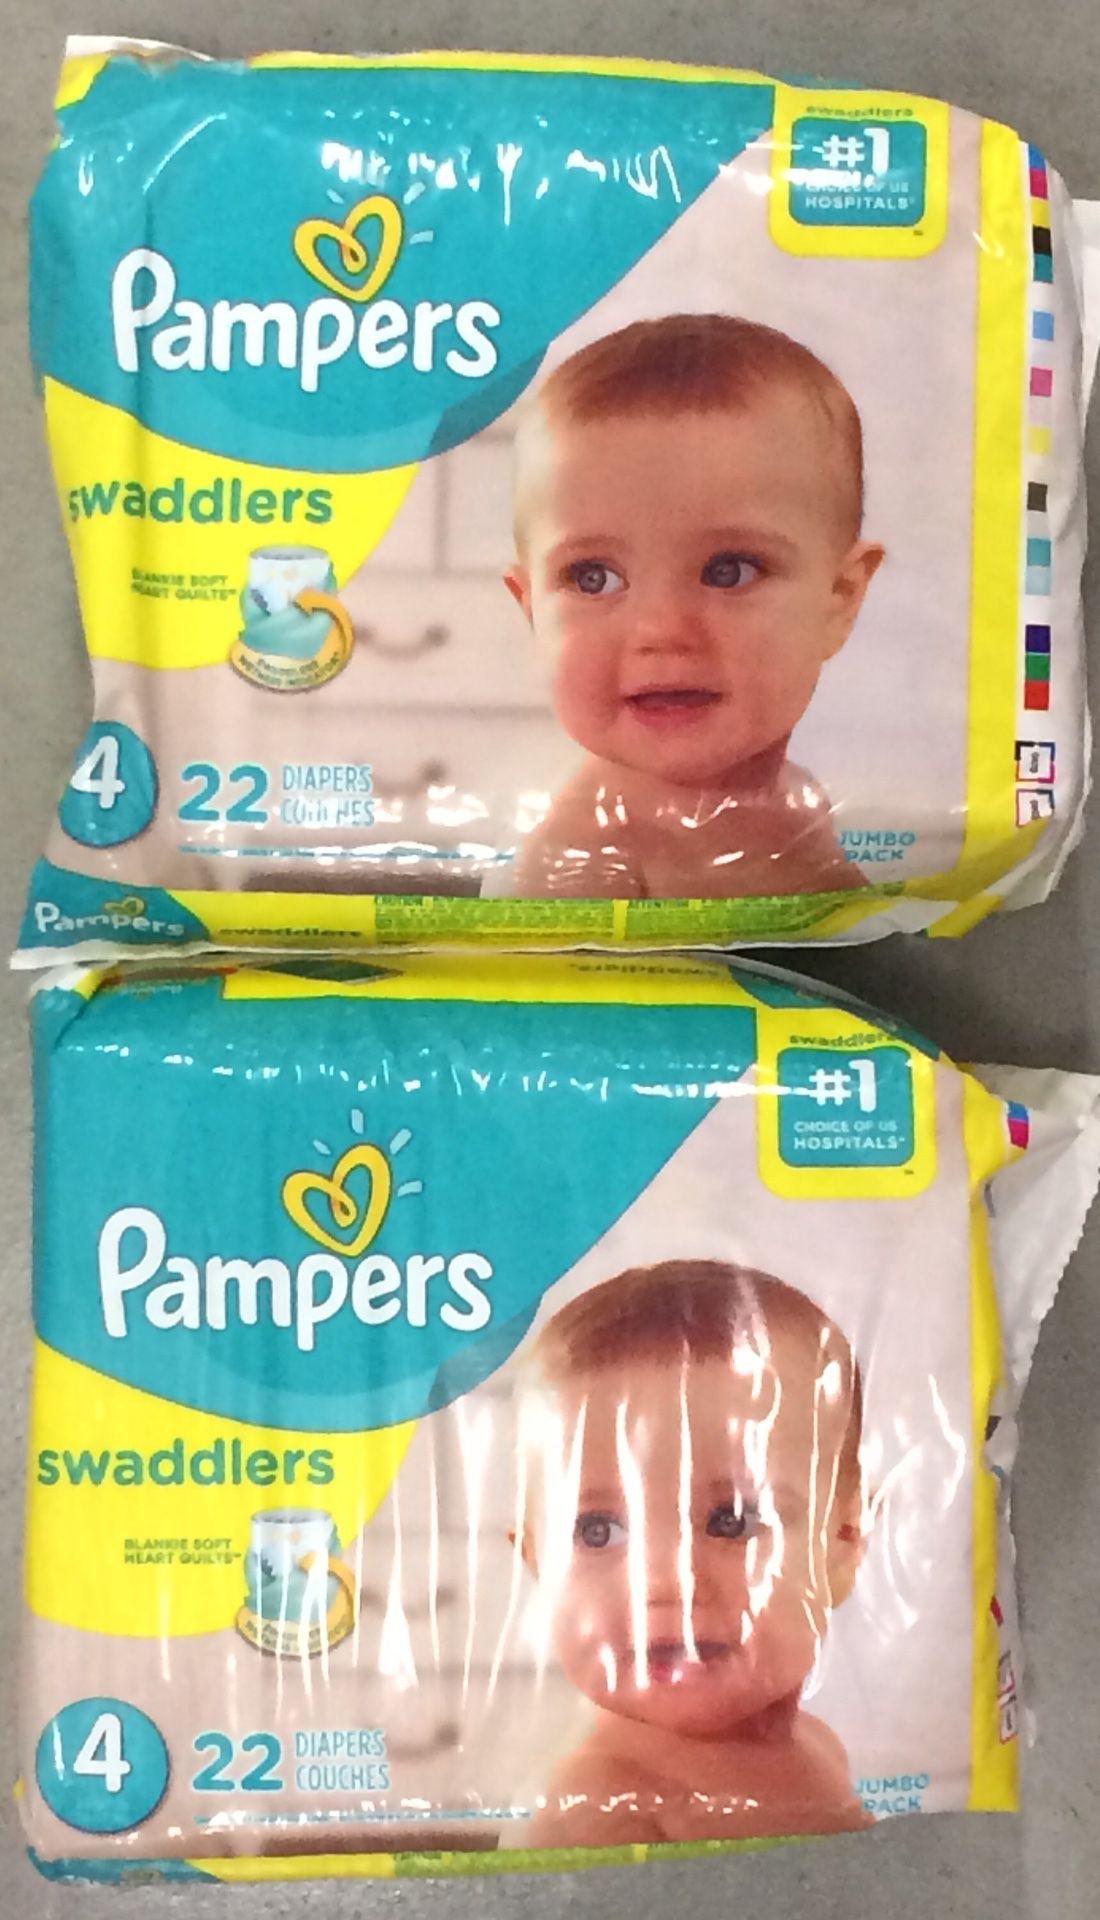 Pampers Swaddlers Diapers Sz 4, 22ct (Pack of 2)